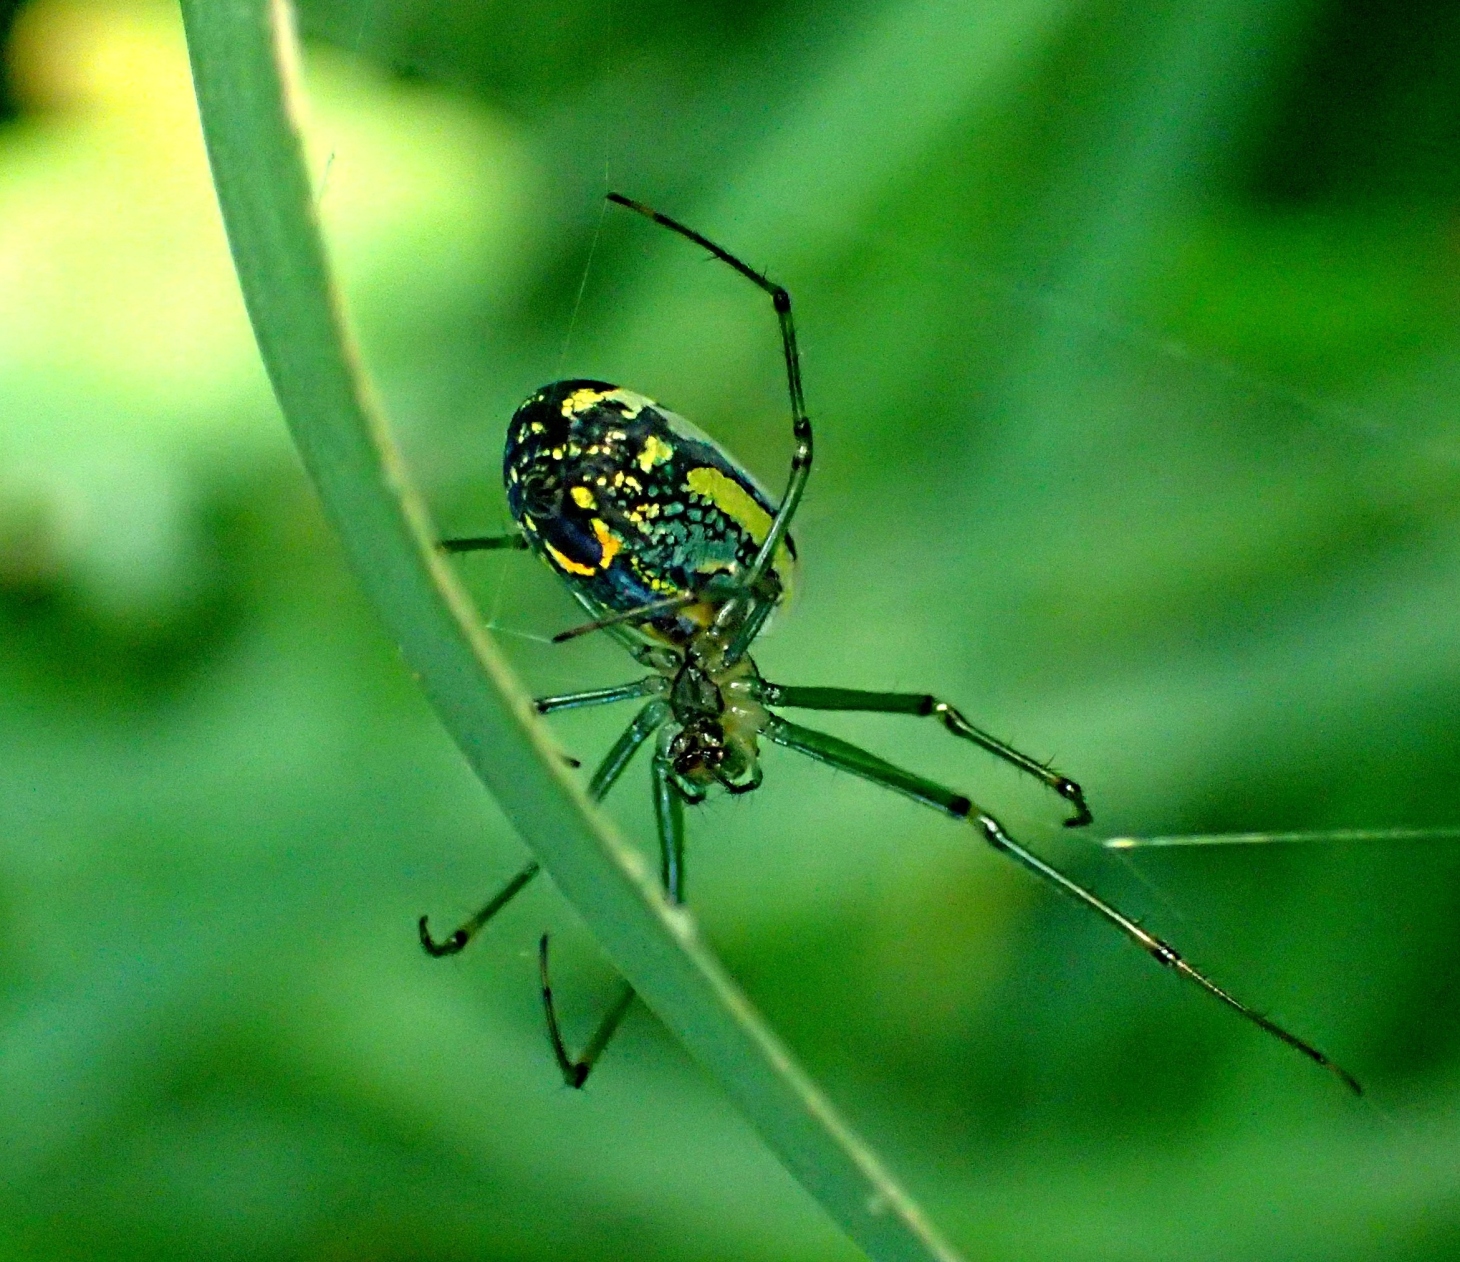 Orchard Spider... master weaver of webs (Photo 1) taken by Thomas Peace 2014